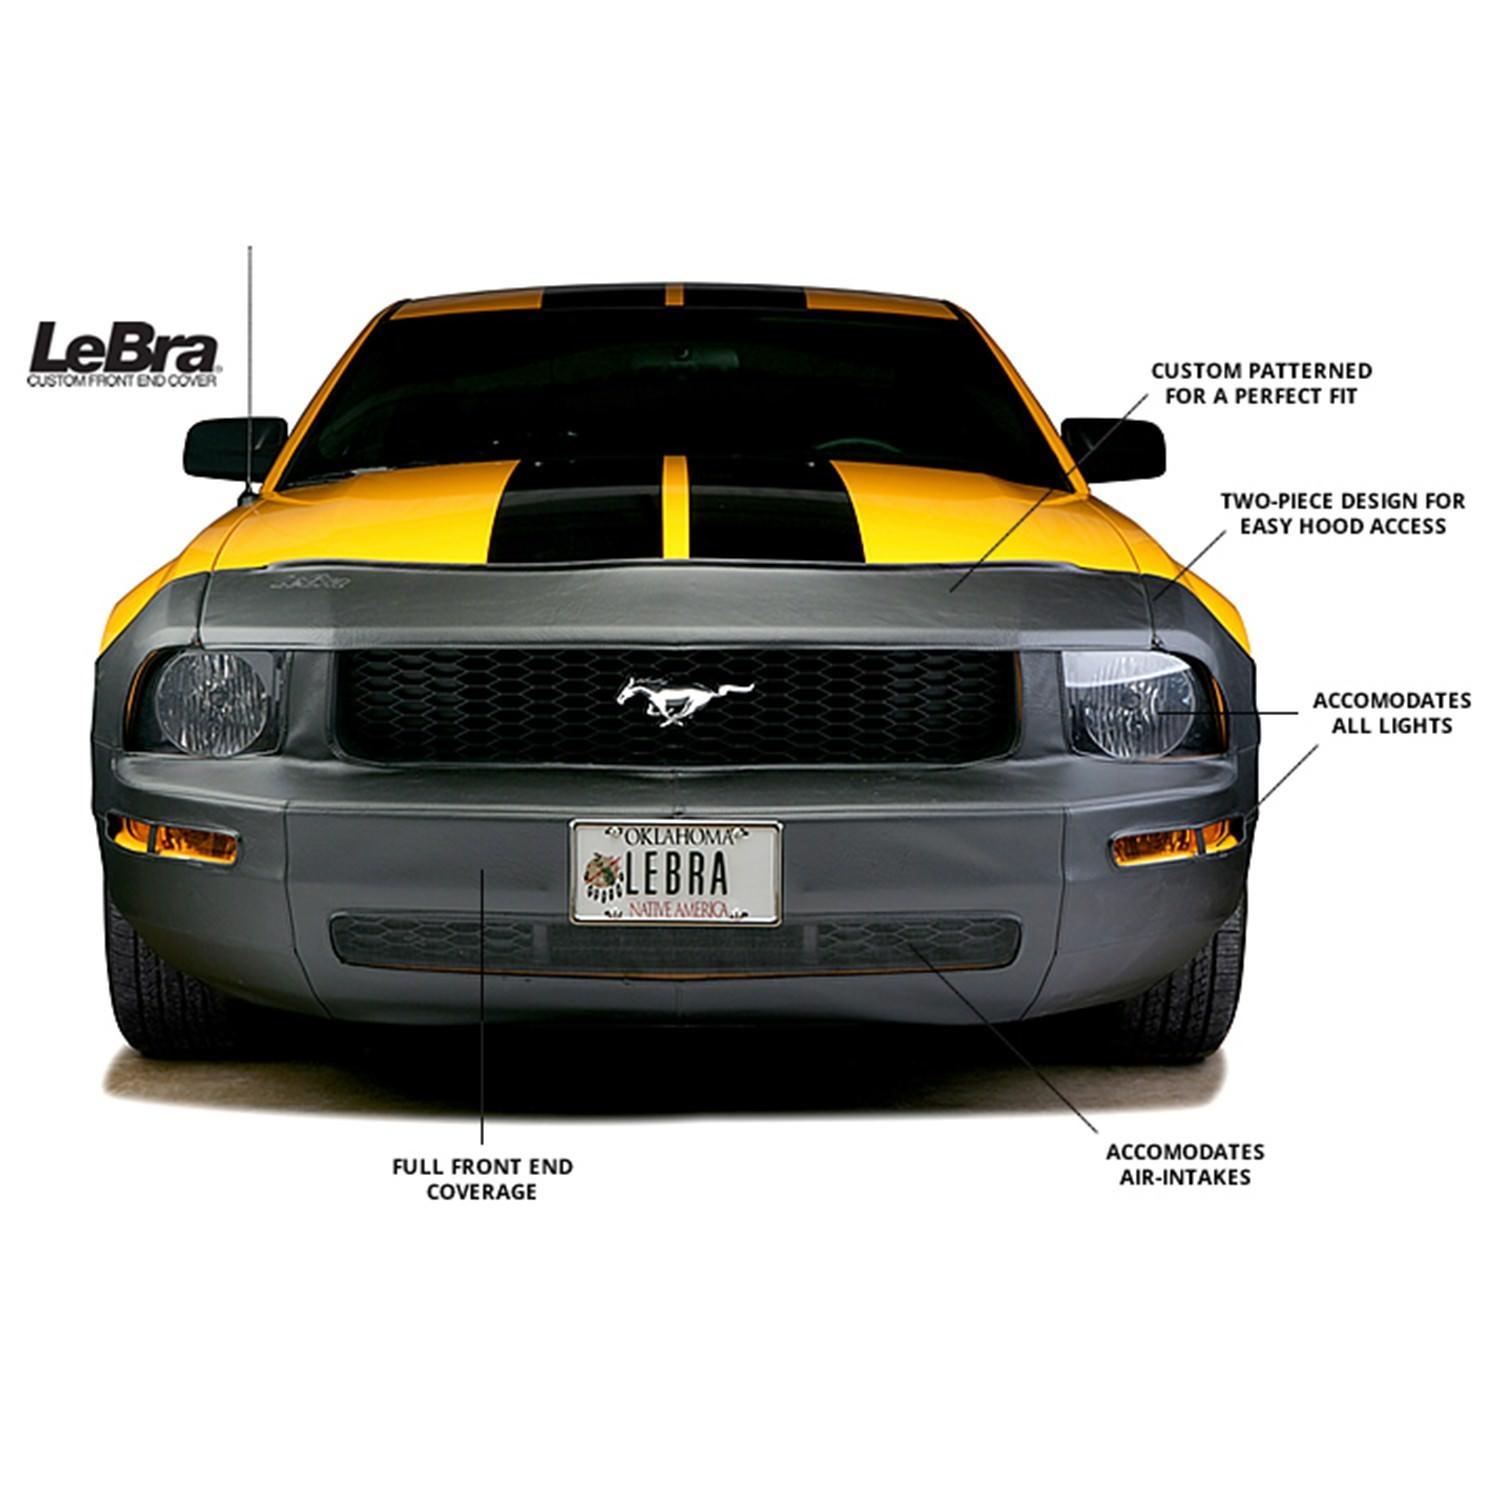 When you need full custom front end protection that fits great, looks awesome and is very affordable...look no further than LeBra! Each LeBra is specifically designed for your exact Year/Make/Model vehicle.  If your model has fog lights, special air-intakes or even pop-up headlights, there is a LeBra cover for you.